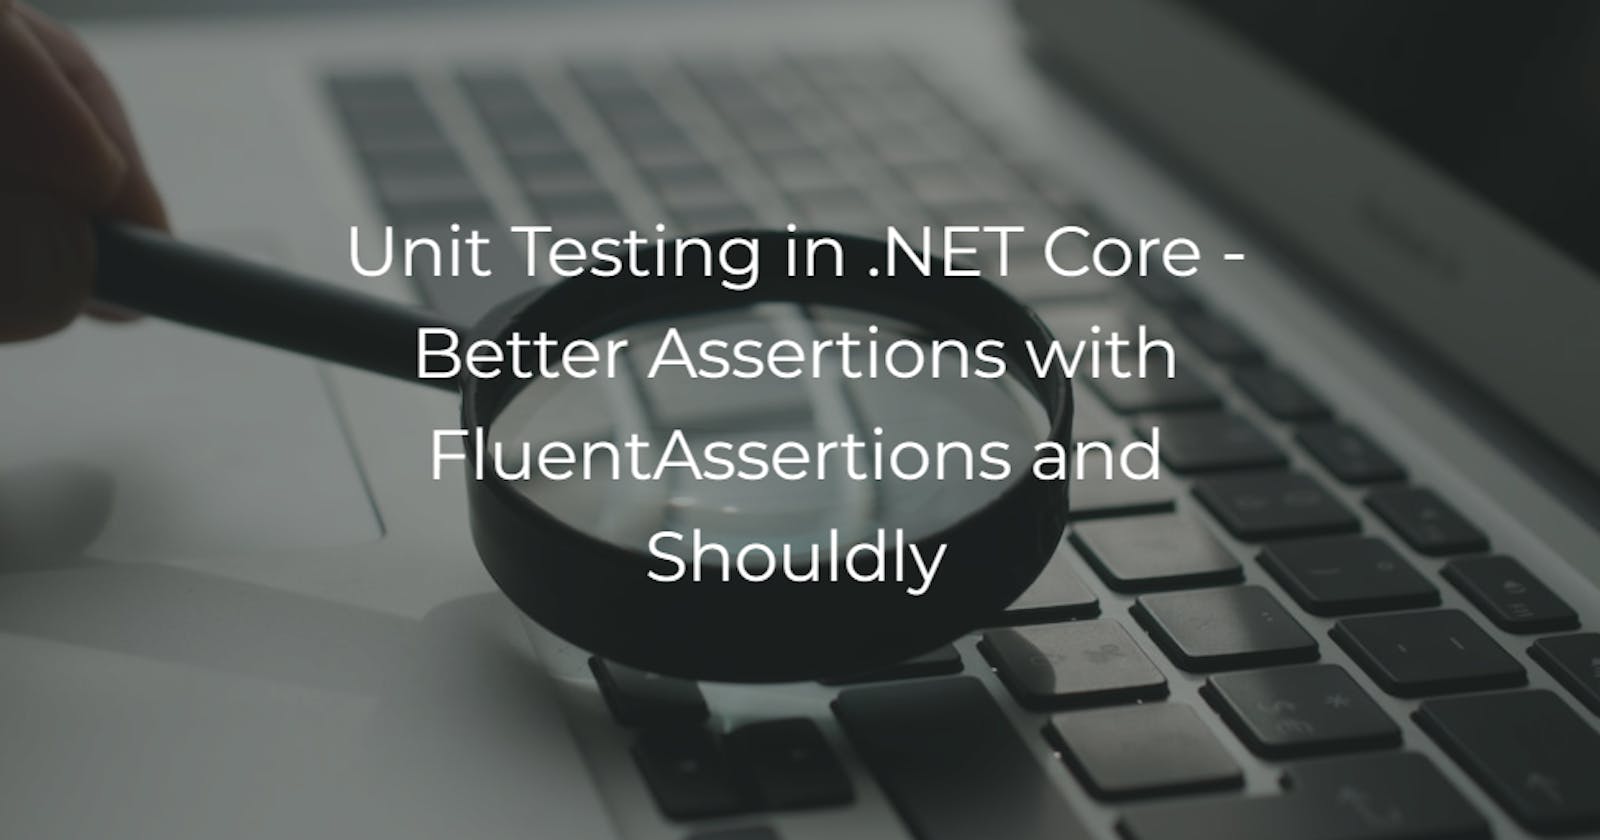 Unit Testing in .NET Core - Better Assertions with FluentAssertions and Shouldly